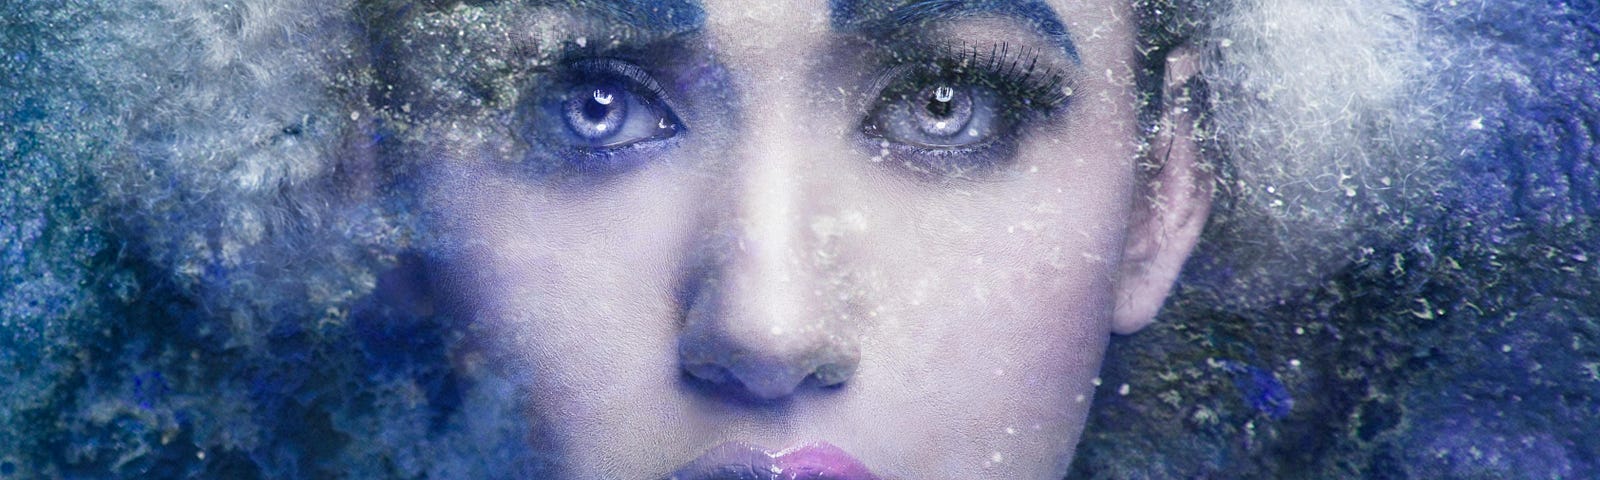 A woman with light blue eyes and purple lipstick poses with a shocked expression, the cool tones and frosted effects of the shot indicate she’s encased beneath a sheet of ice.